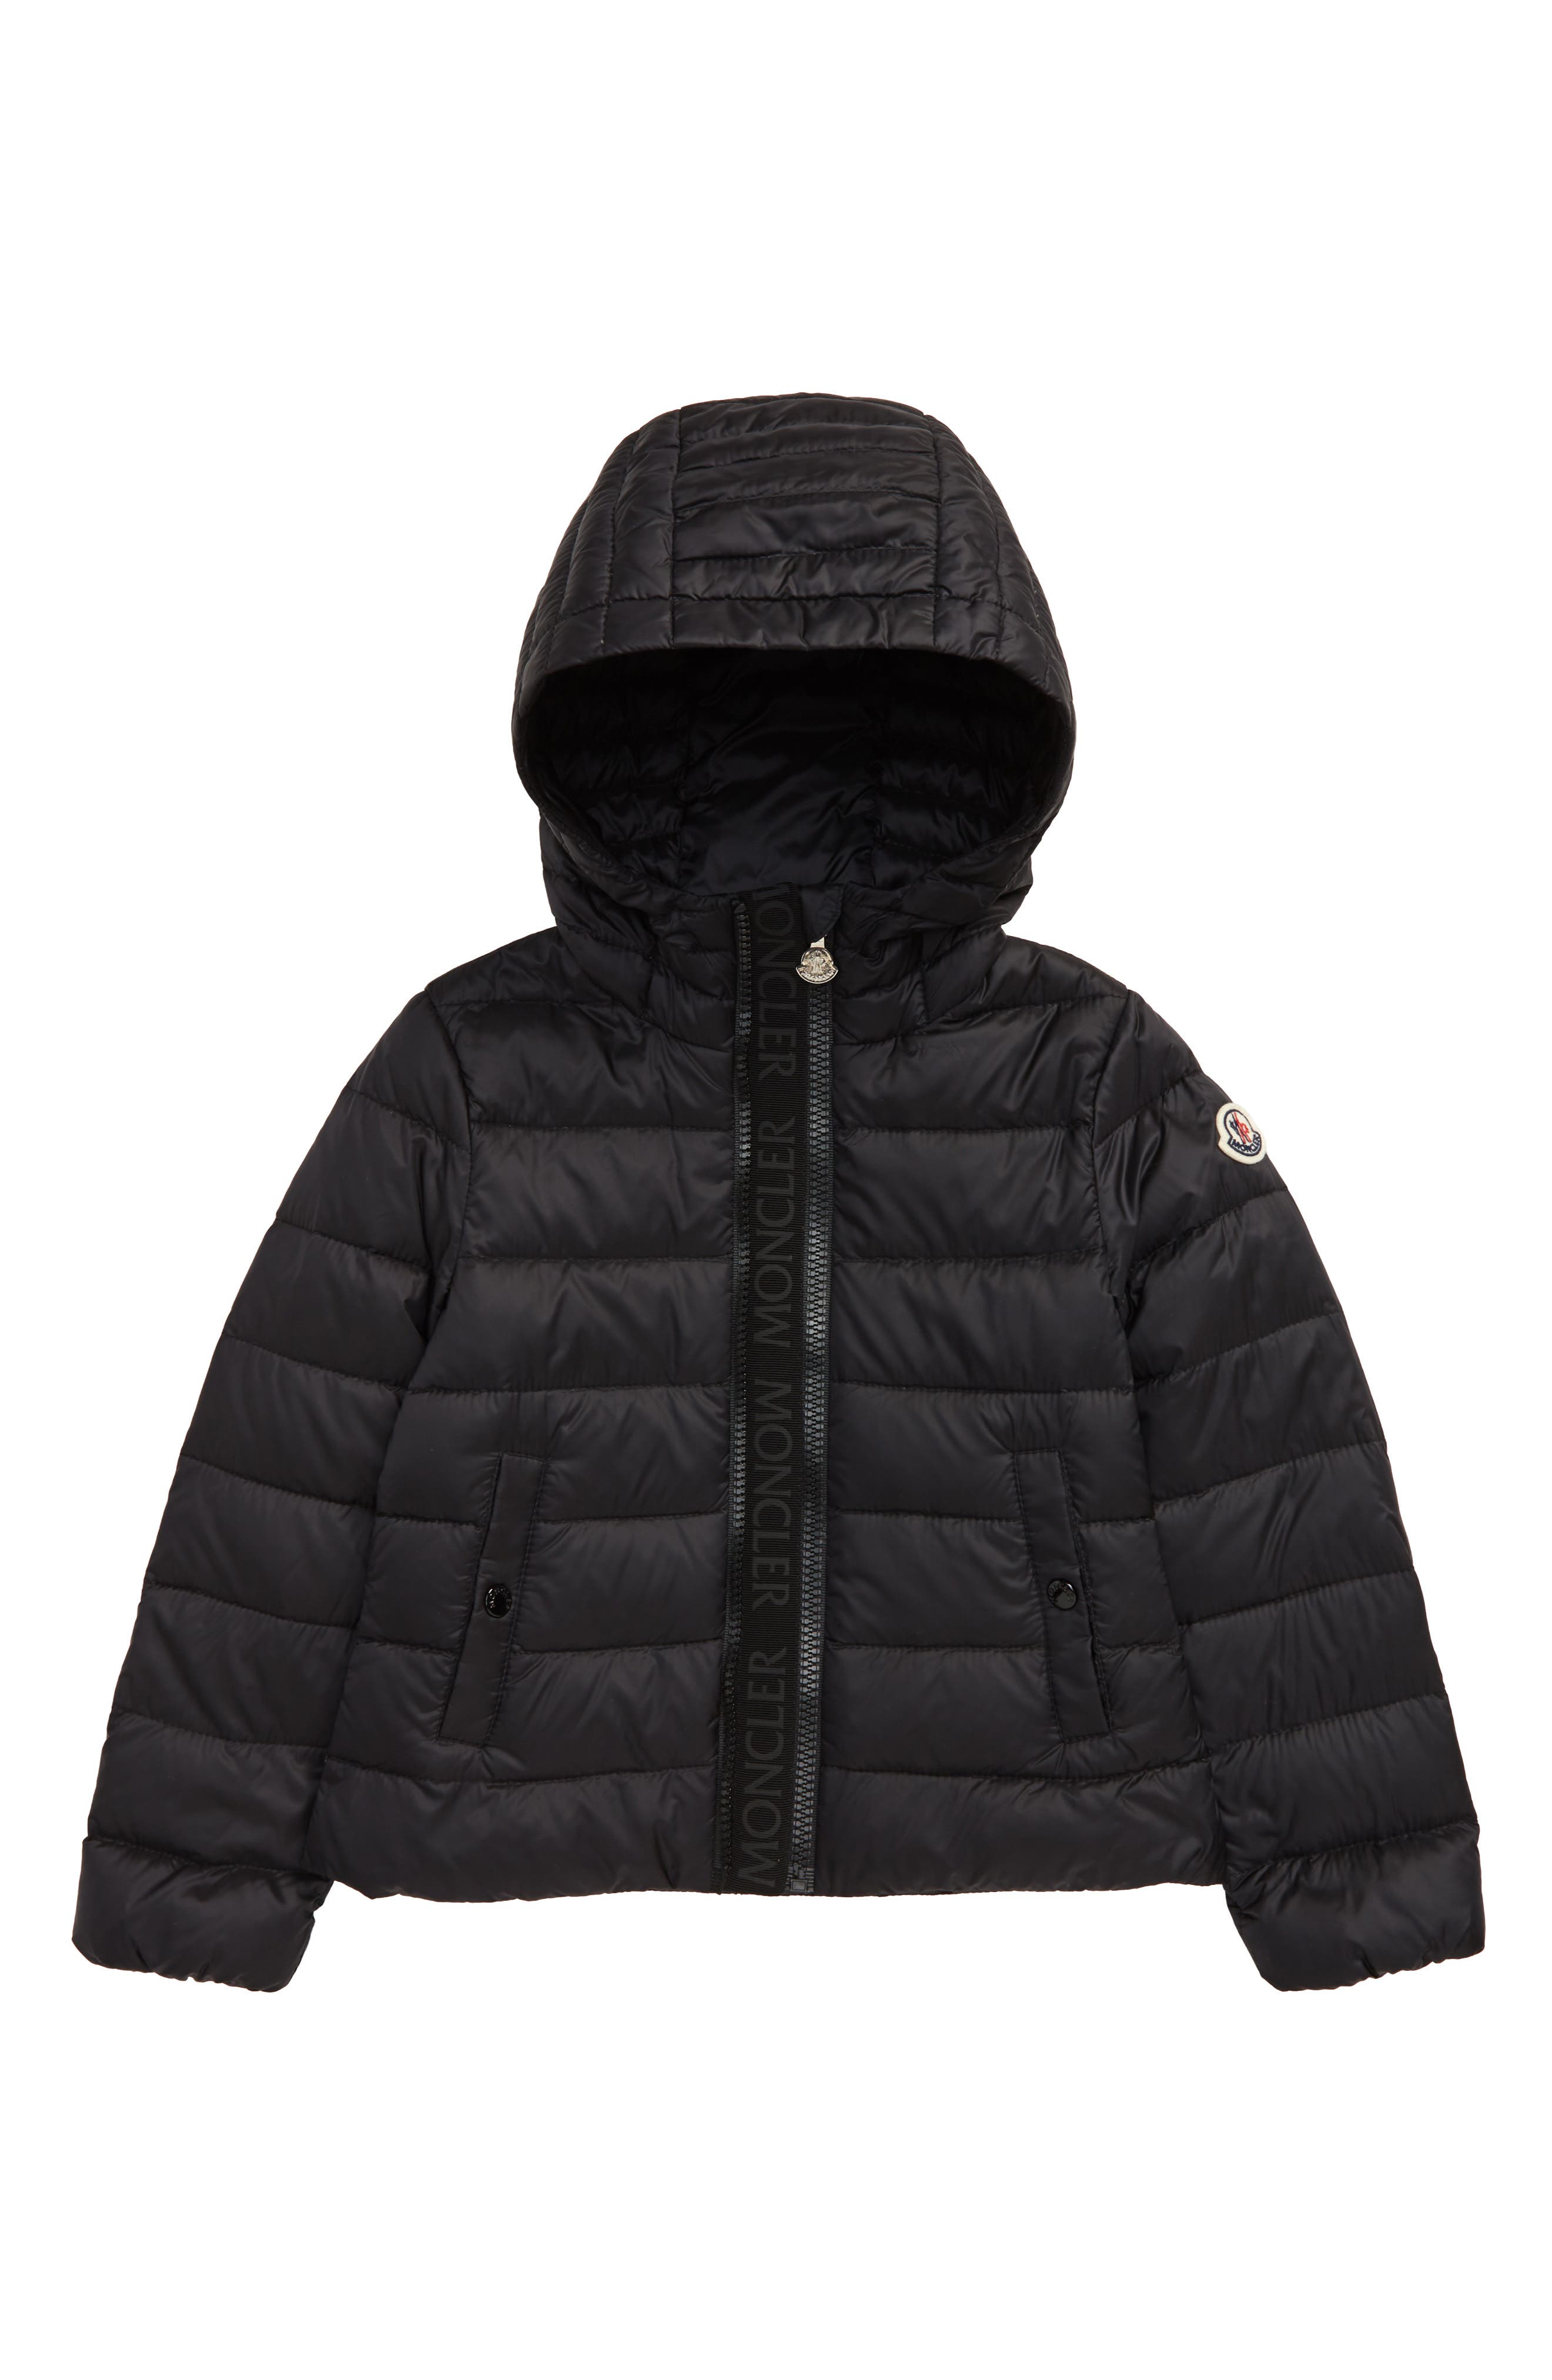 Girls' Moncler Clothing and Accessories 